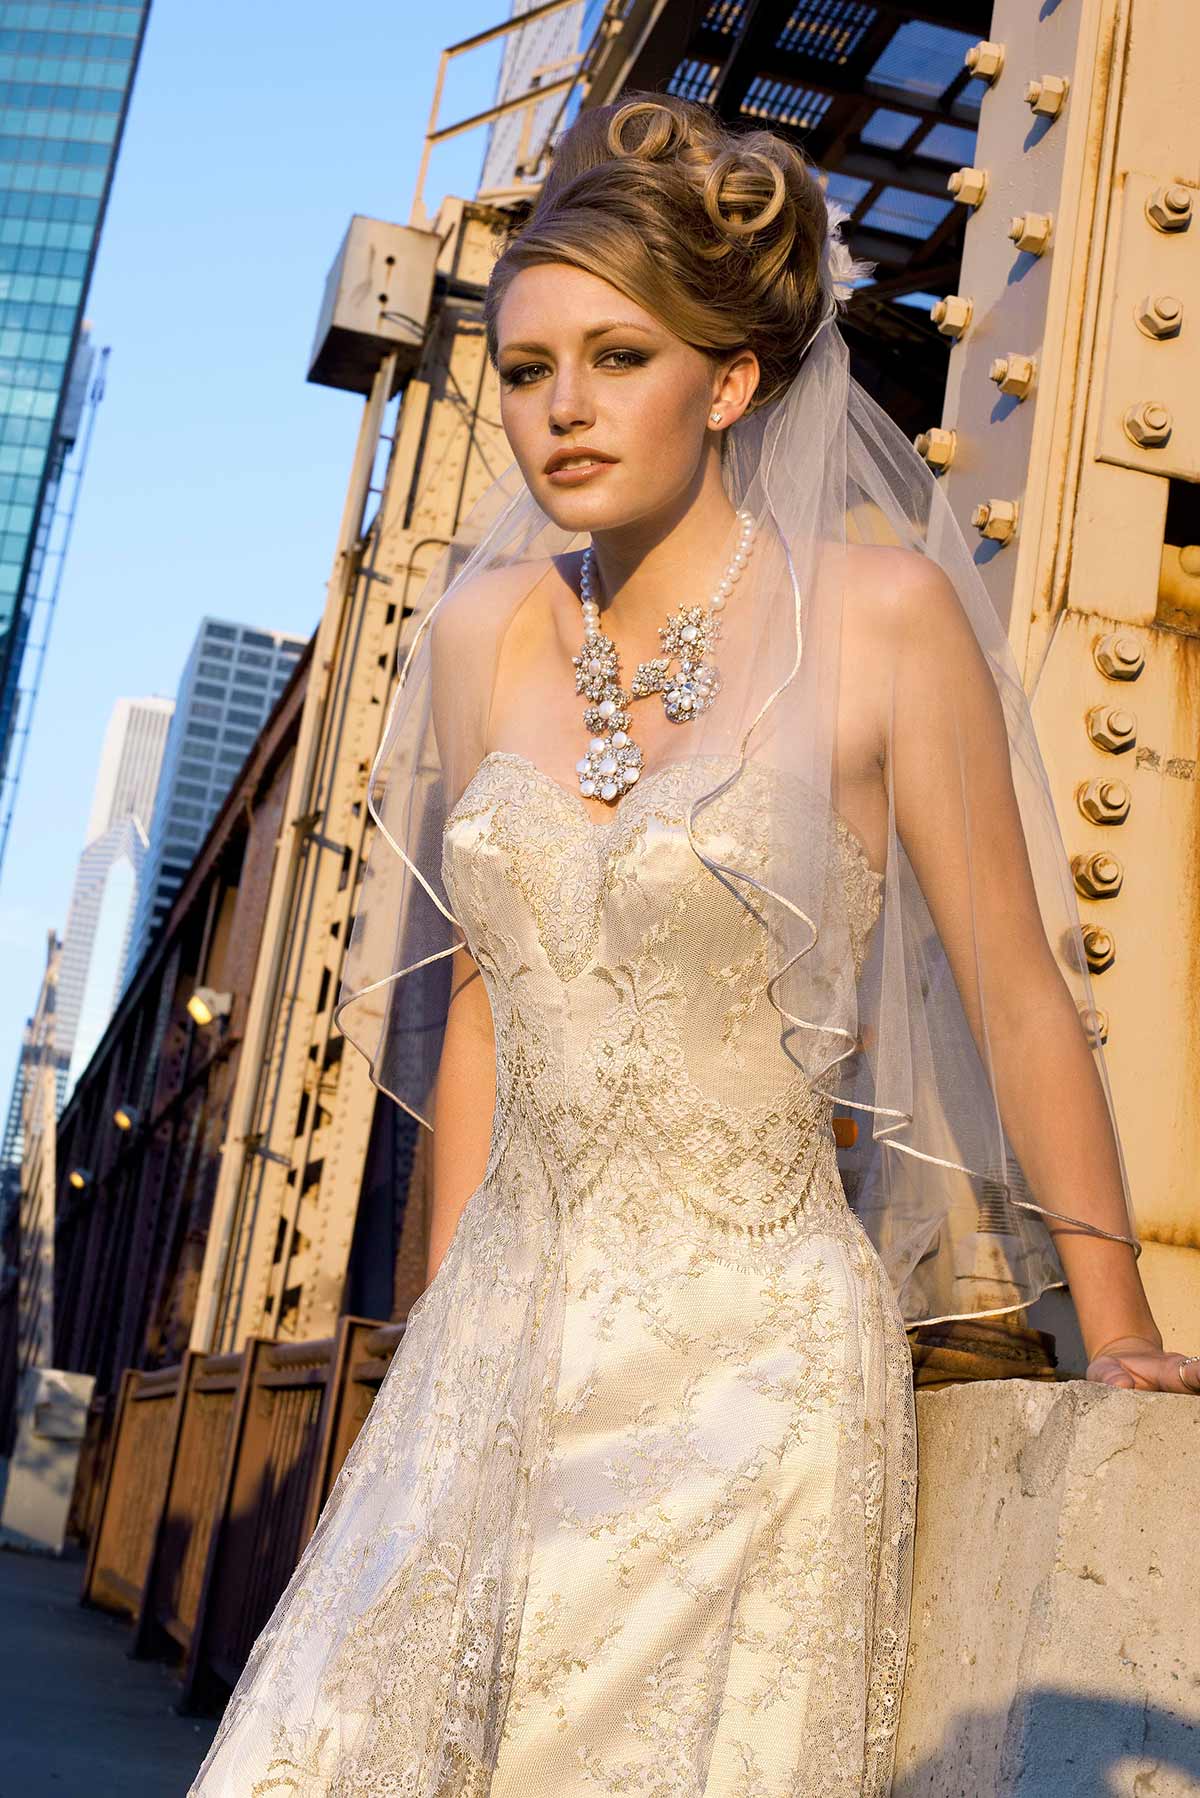 GOLD CHANTILLY|Constance McCardle Fashion Design | Photography: Jean Sweet